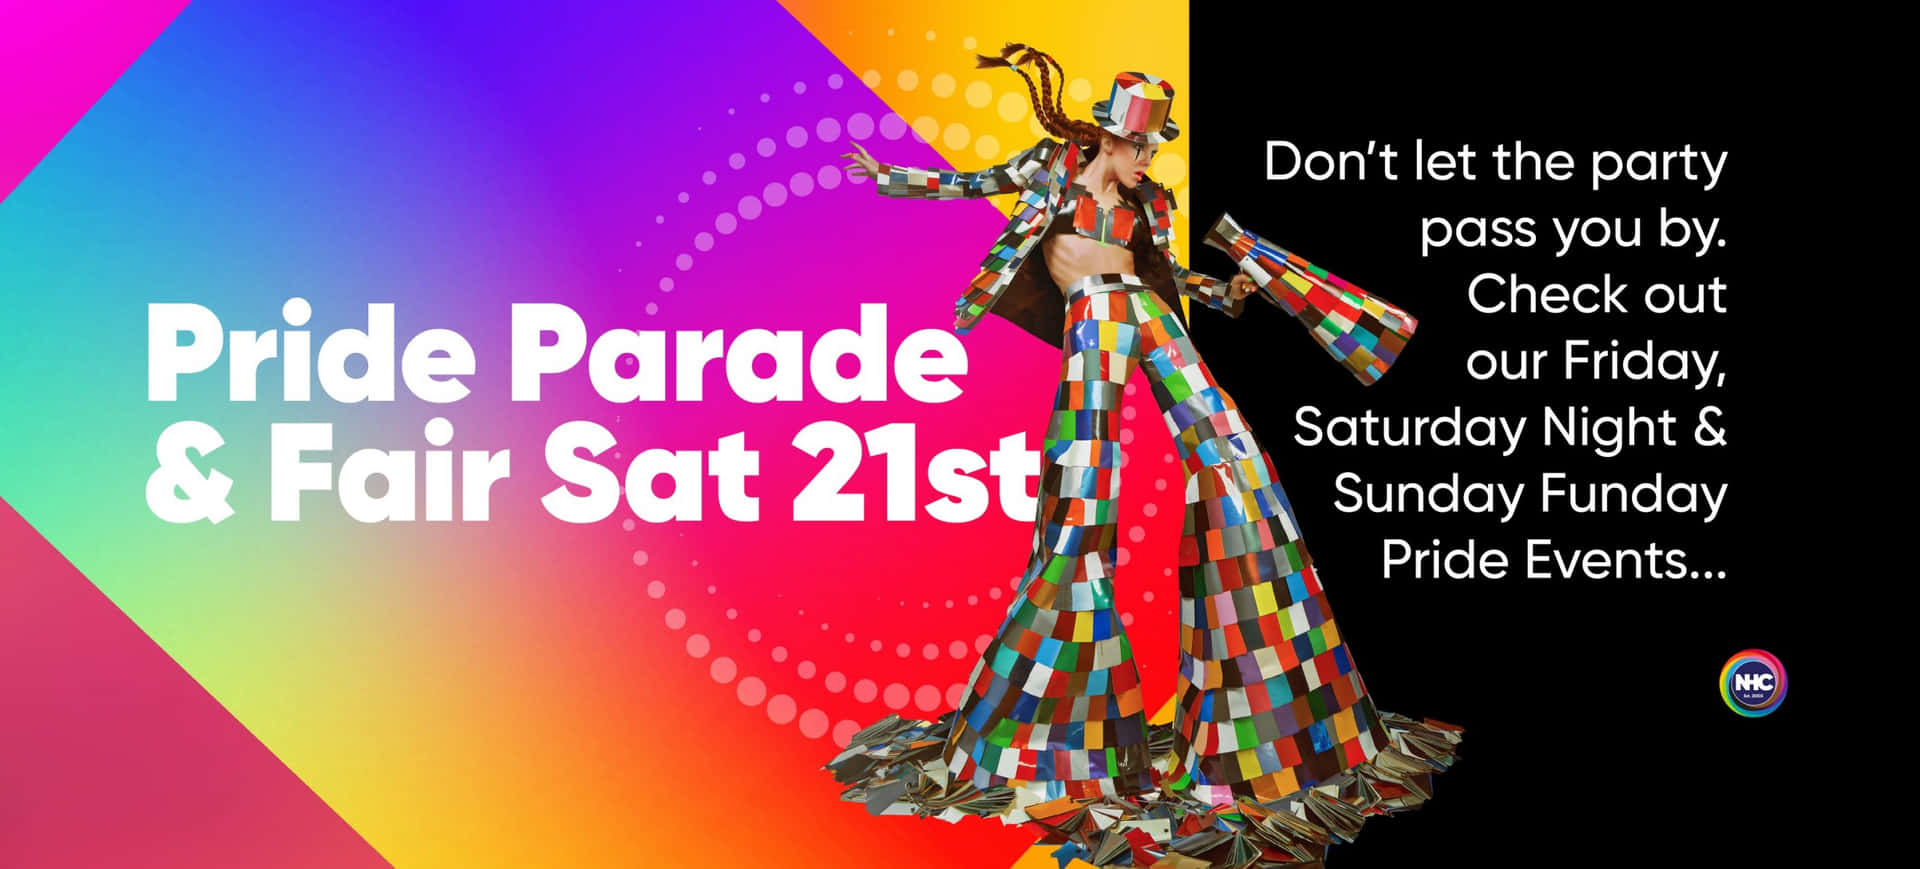 Pride Parade And Fair Sat 21st Poster Picture